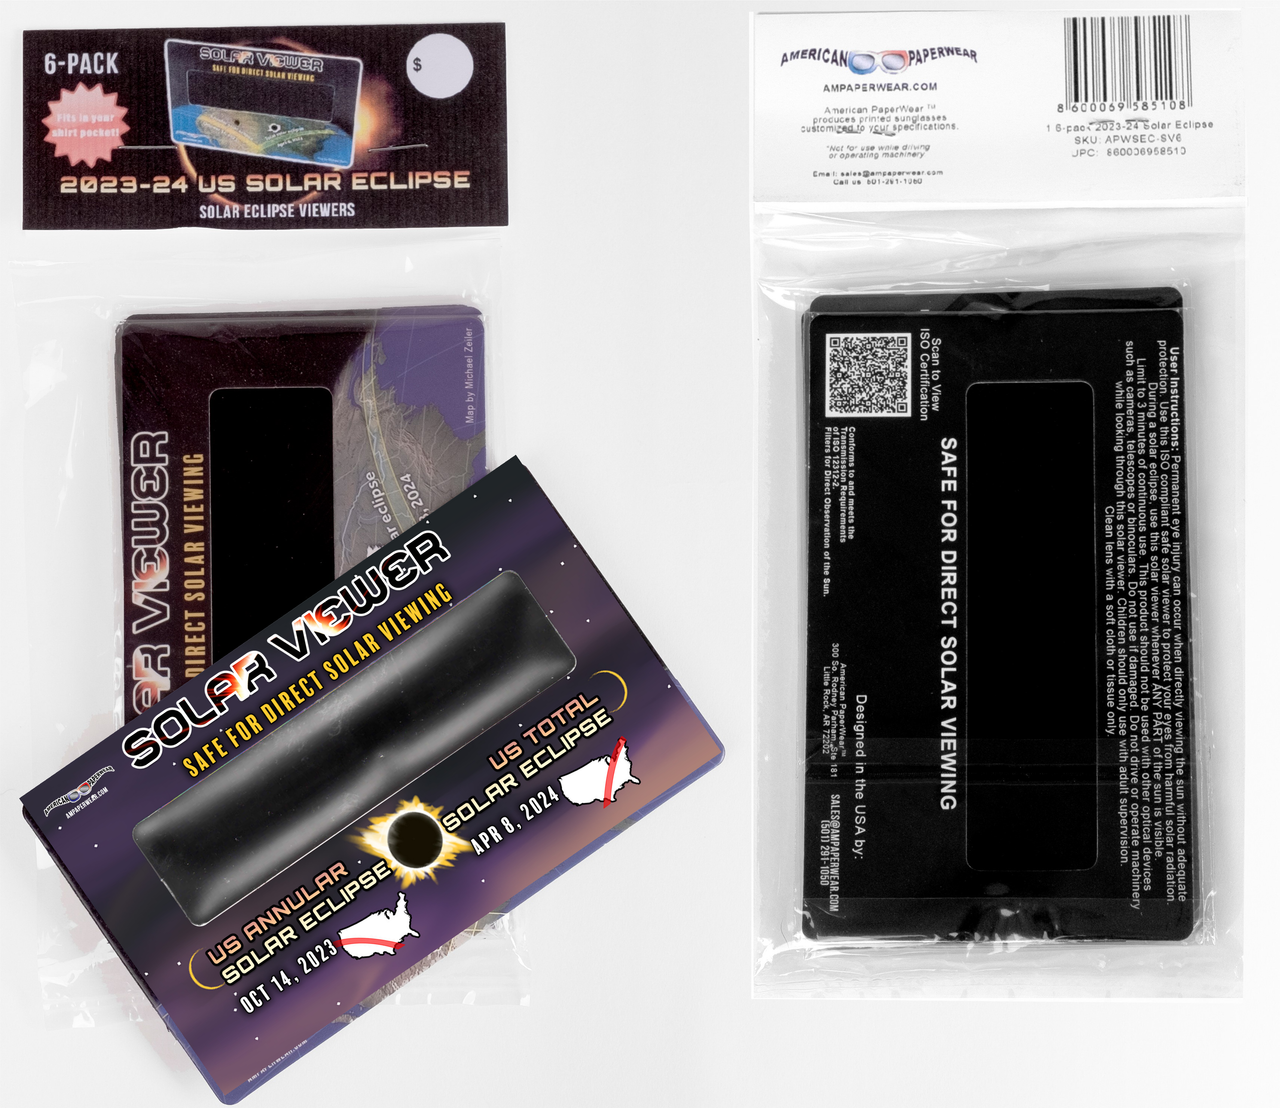 2023-24 US Solar Eclipse Viewers, retail ready 6-pack